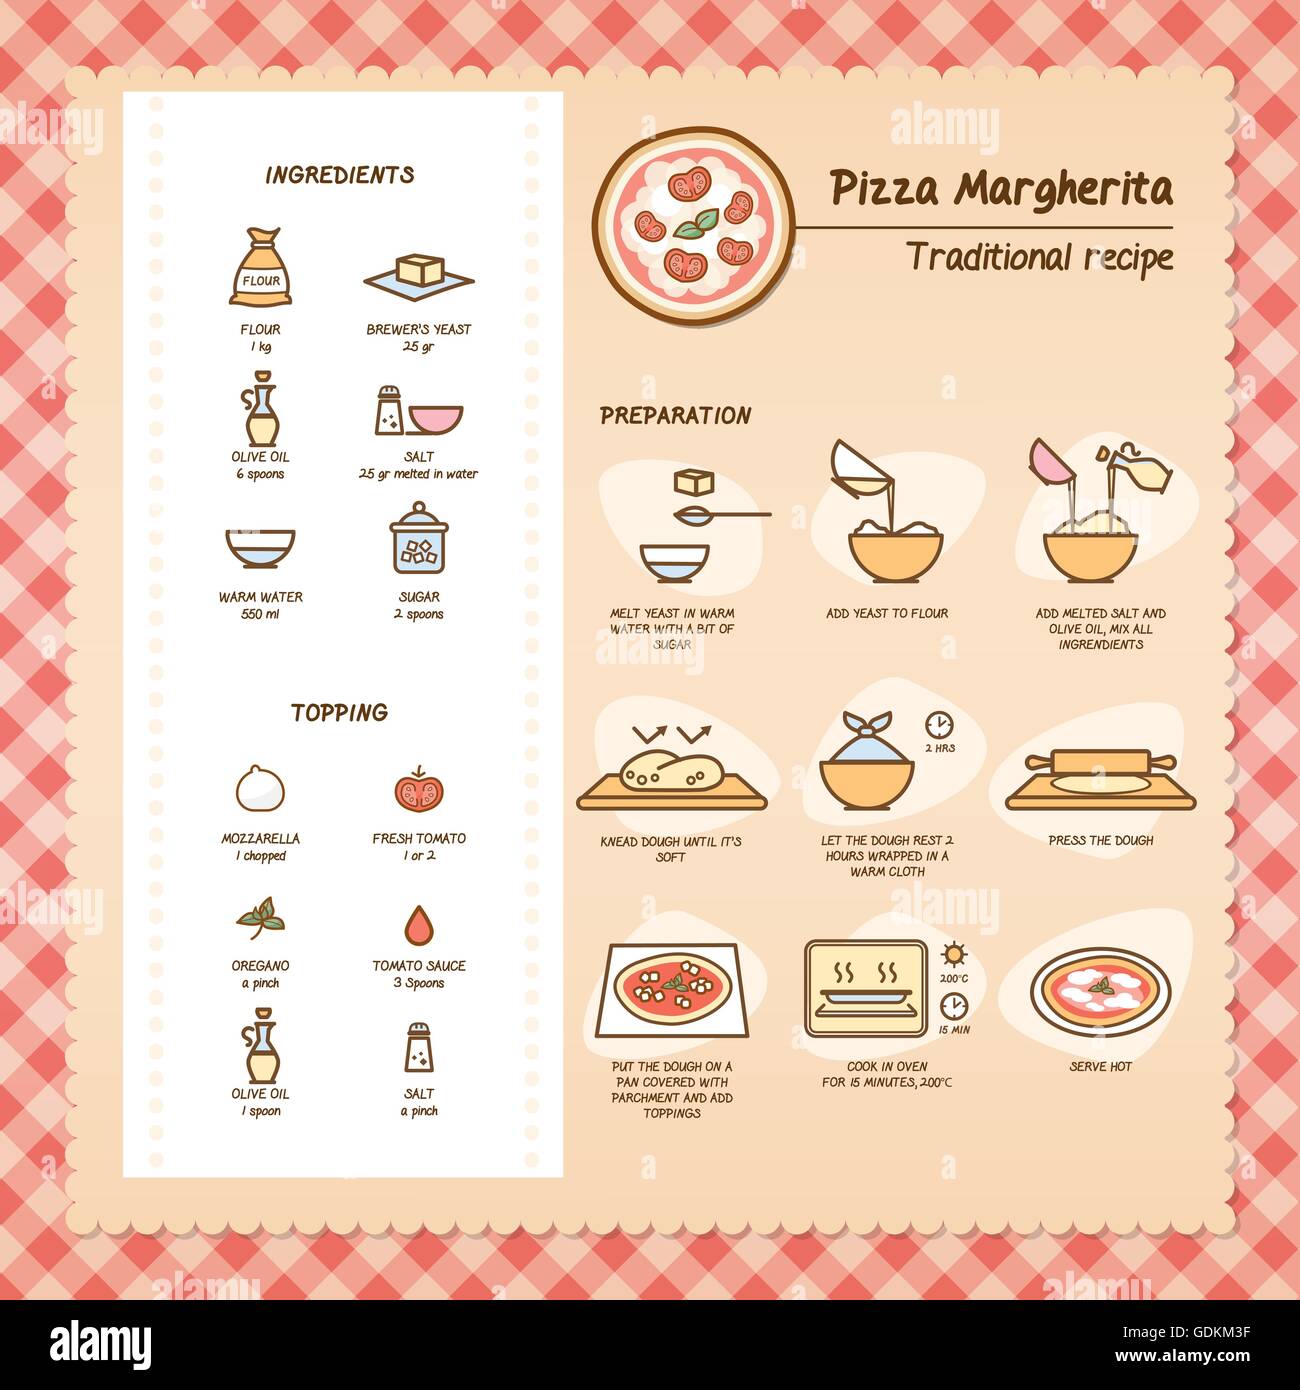 Pizza margherita traditional recipe with ingredients and preparation Stock Vector